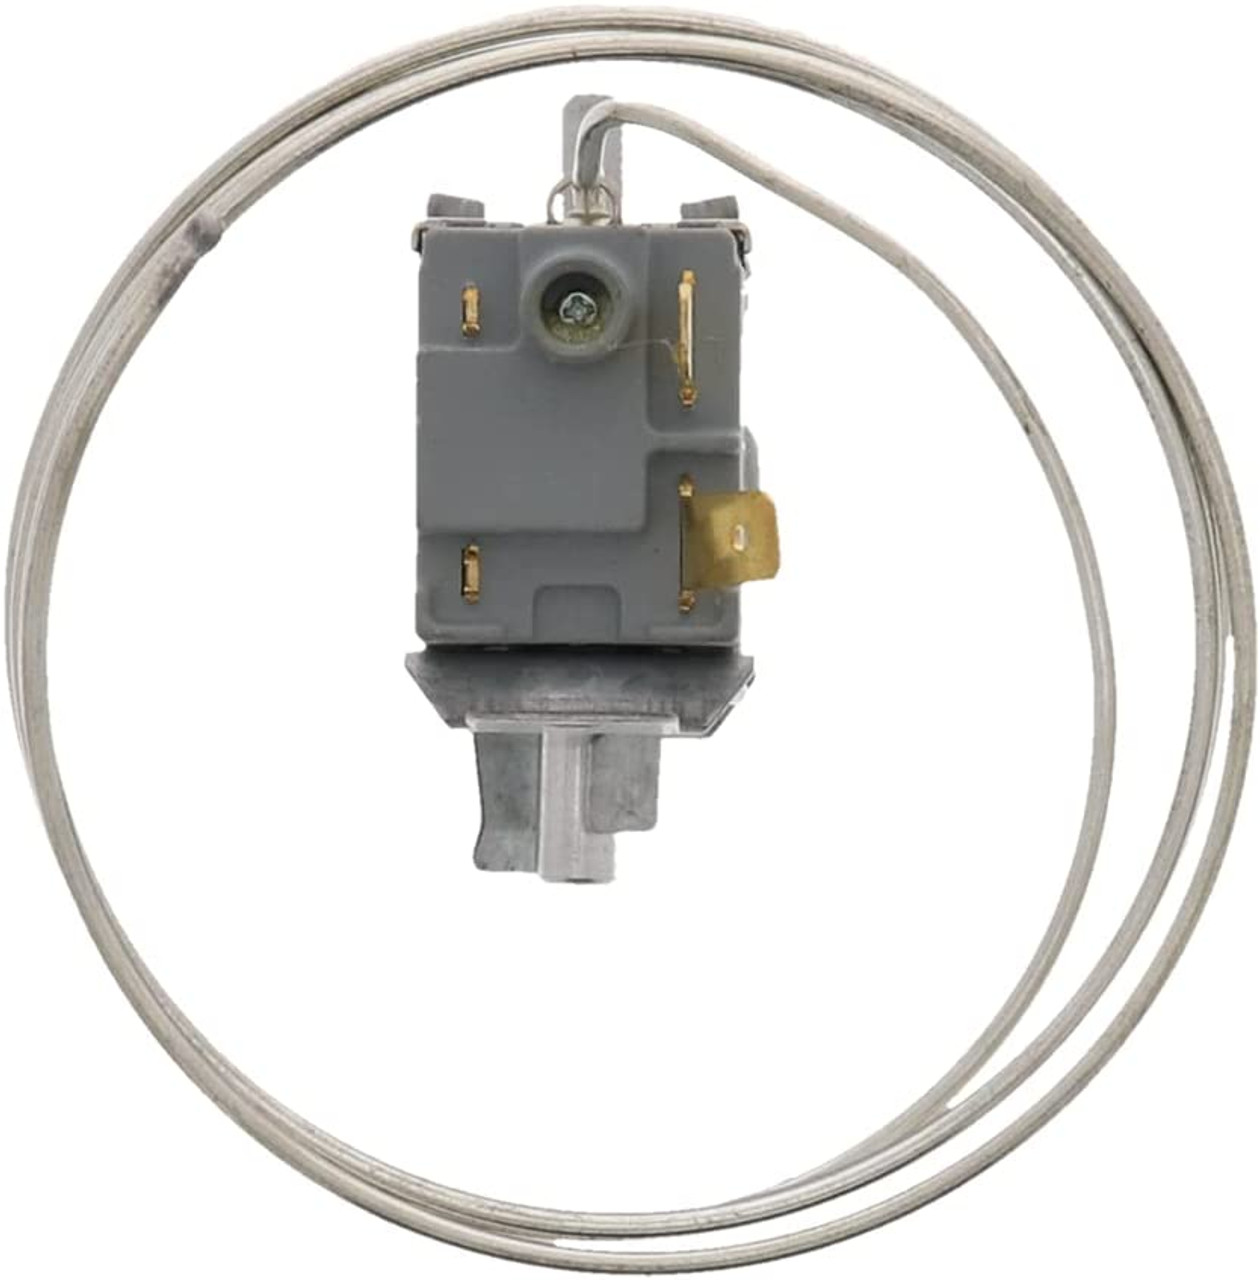 Whirlpool WP2315562 Control Thermostat (AP6007252) 